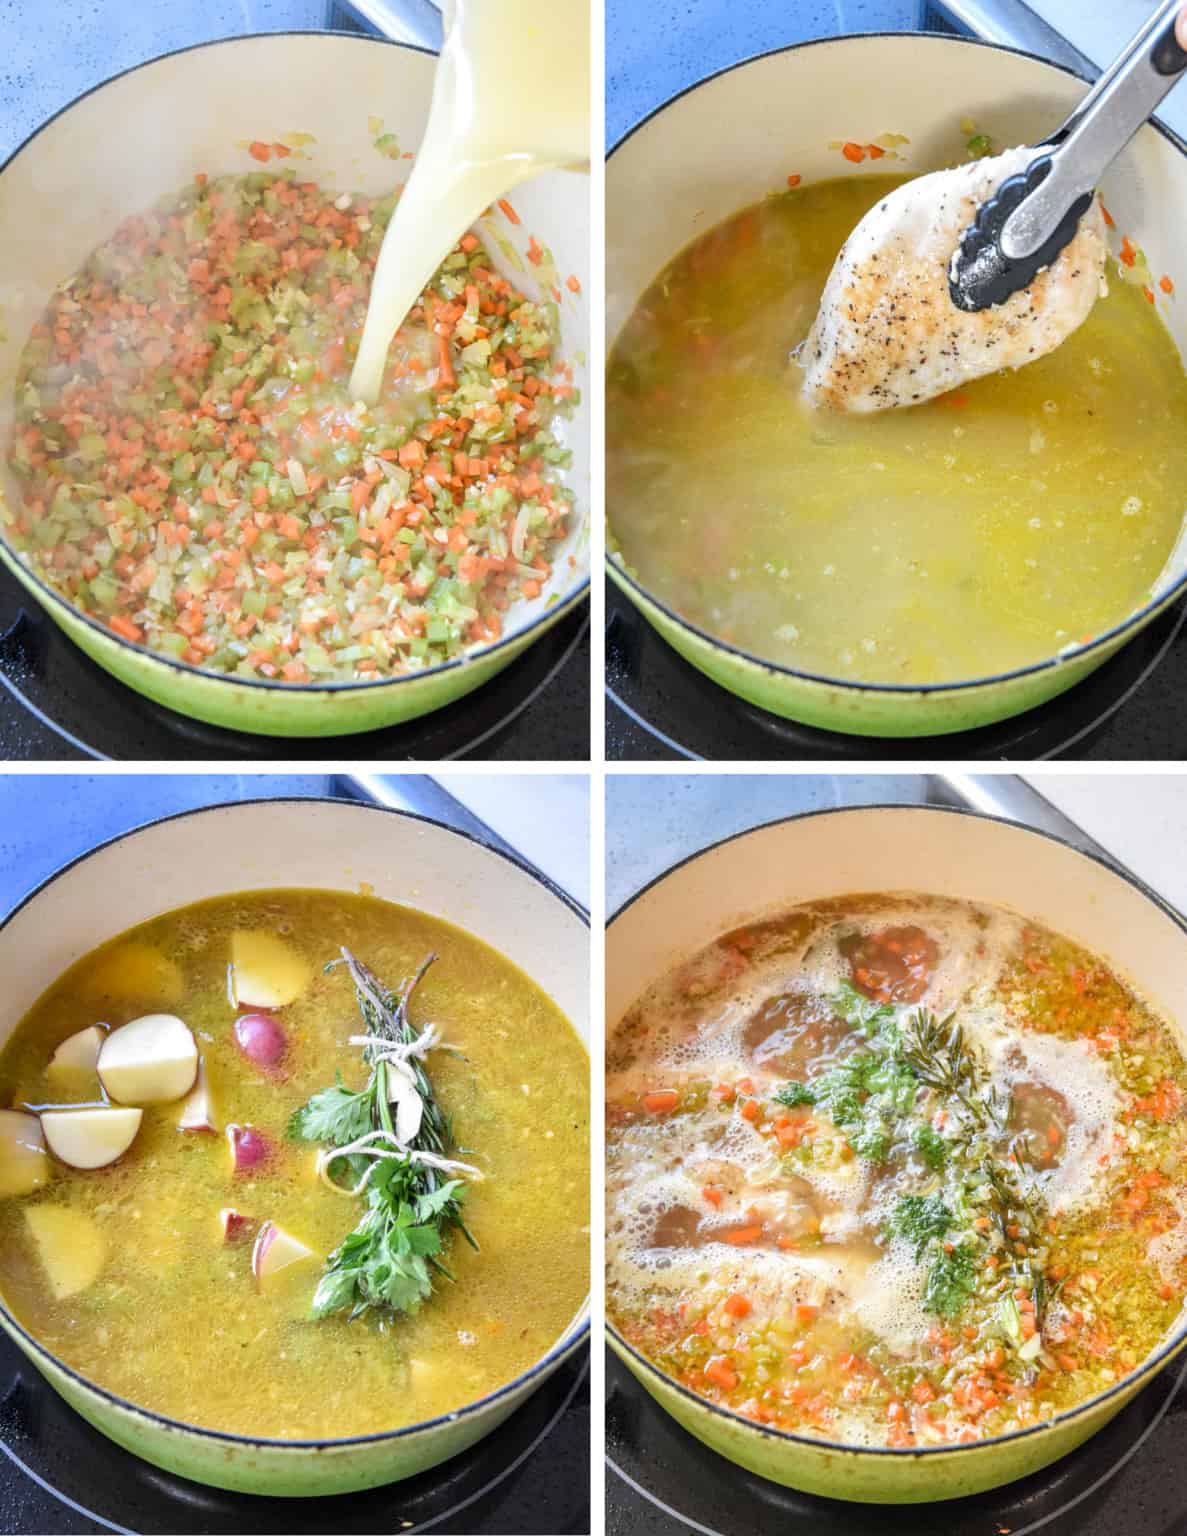 Simple Red Potato Chicken Soup - Project Meal Plan